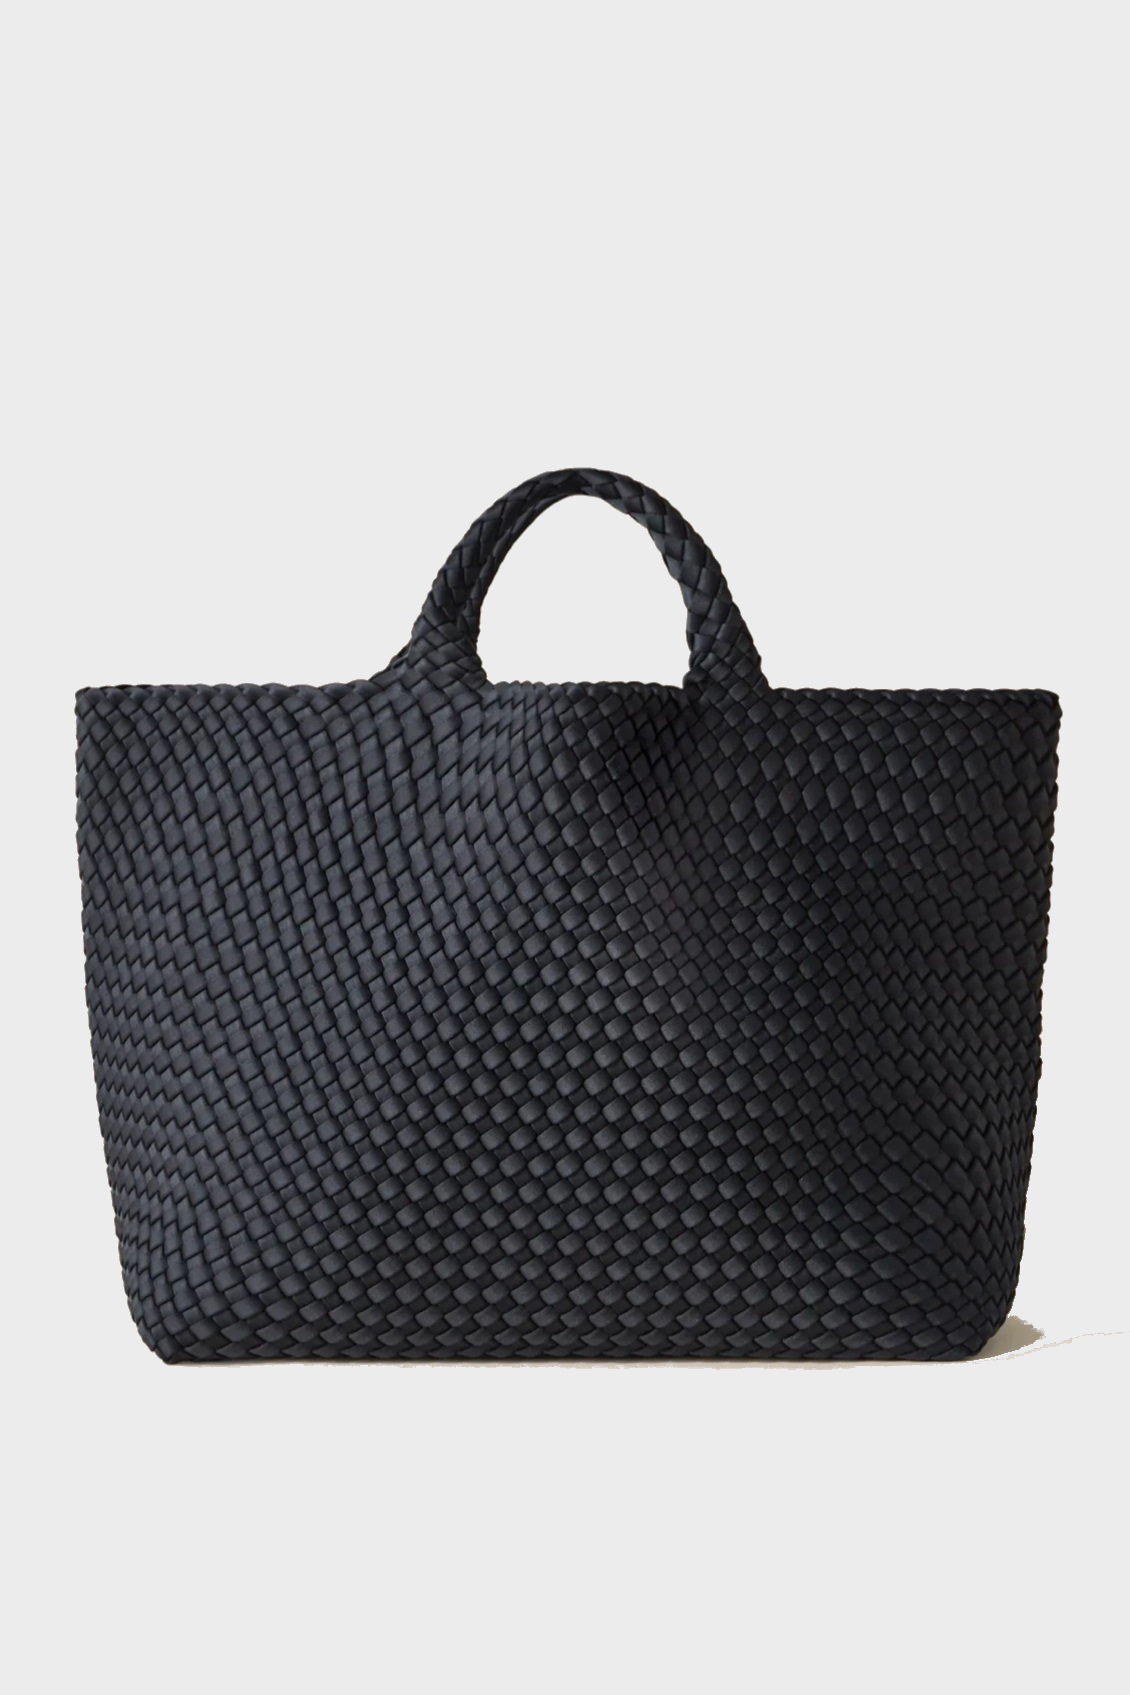 NAGHEDI Handwoven Large Tote St. Barth in Black